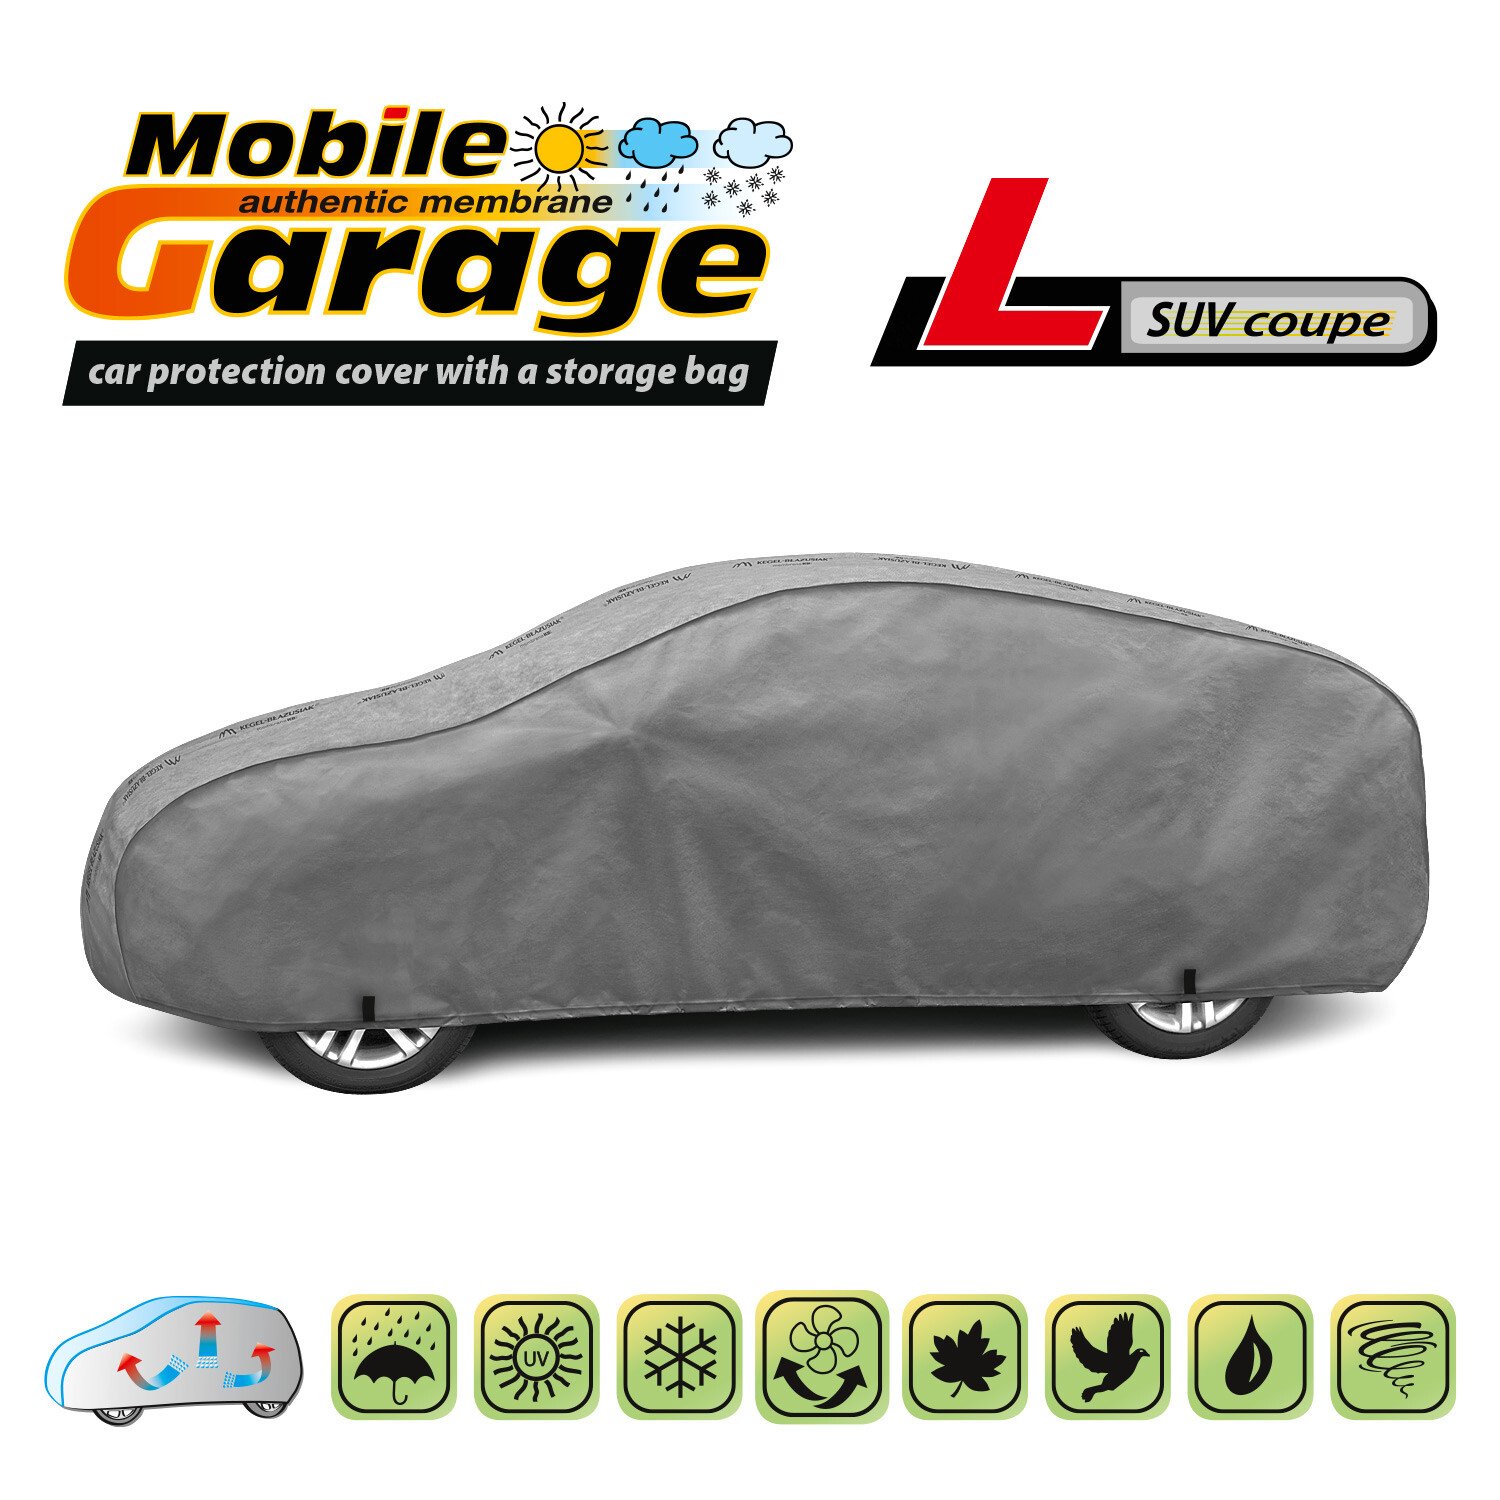 Mobile Garage full car cover size - L SUV - Coupe thumb